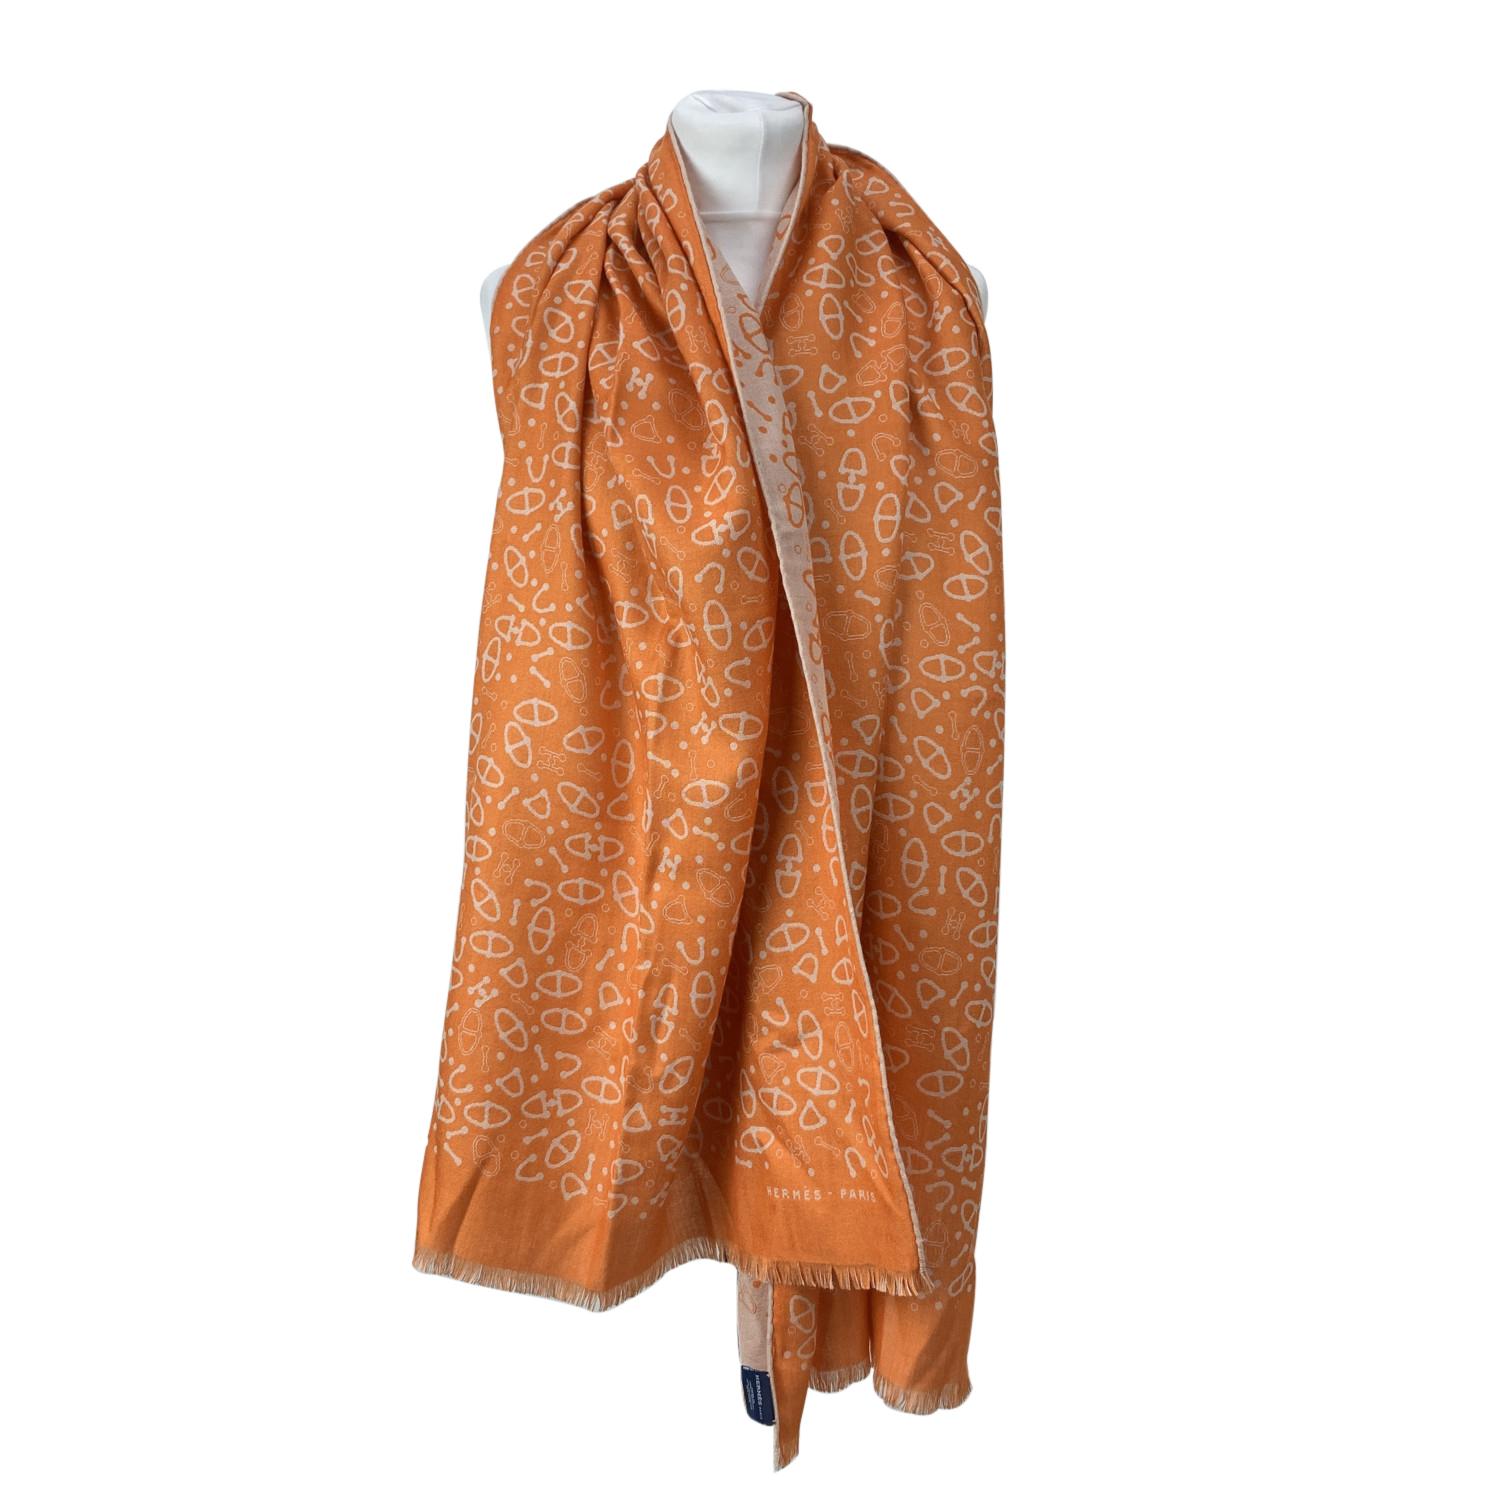 Hermes cashmere and silk reversible stole/scarf. 'Chain d'Ancre' motif. Composition: 70% Cashmere, 30% Silk. Frayed edges. Total length: 73 inches - 185 cm. Width: 24 inches - 61 cm. Hermes omposition tag is still attached.

Details

MATERIAL: